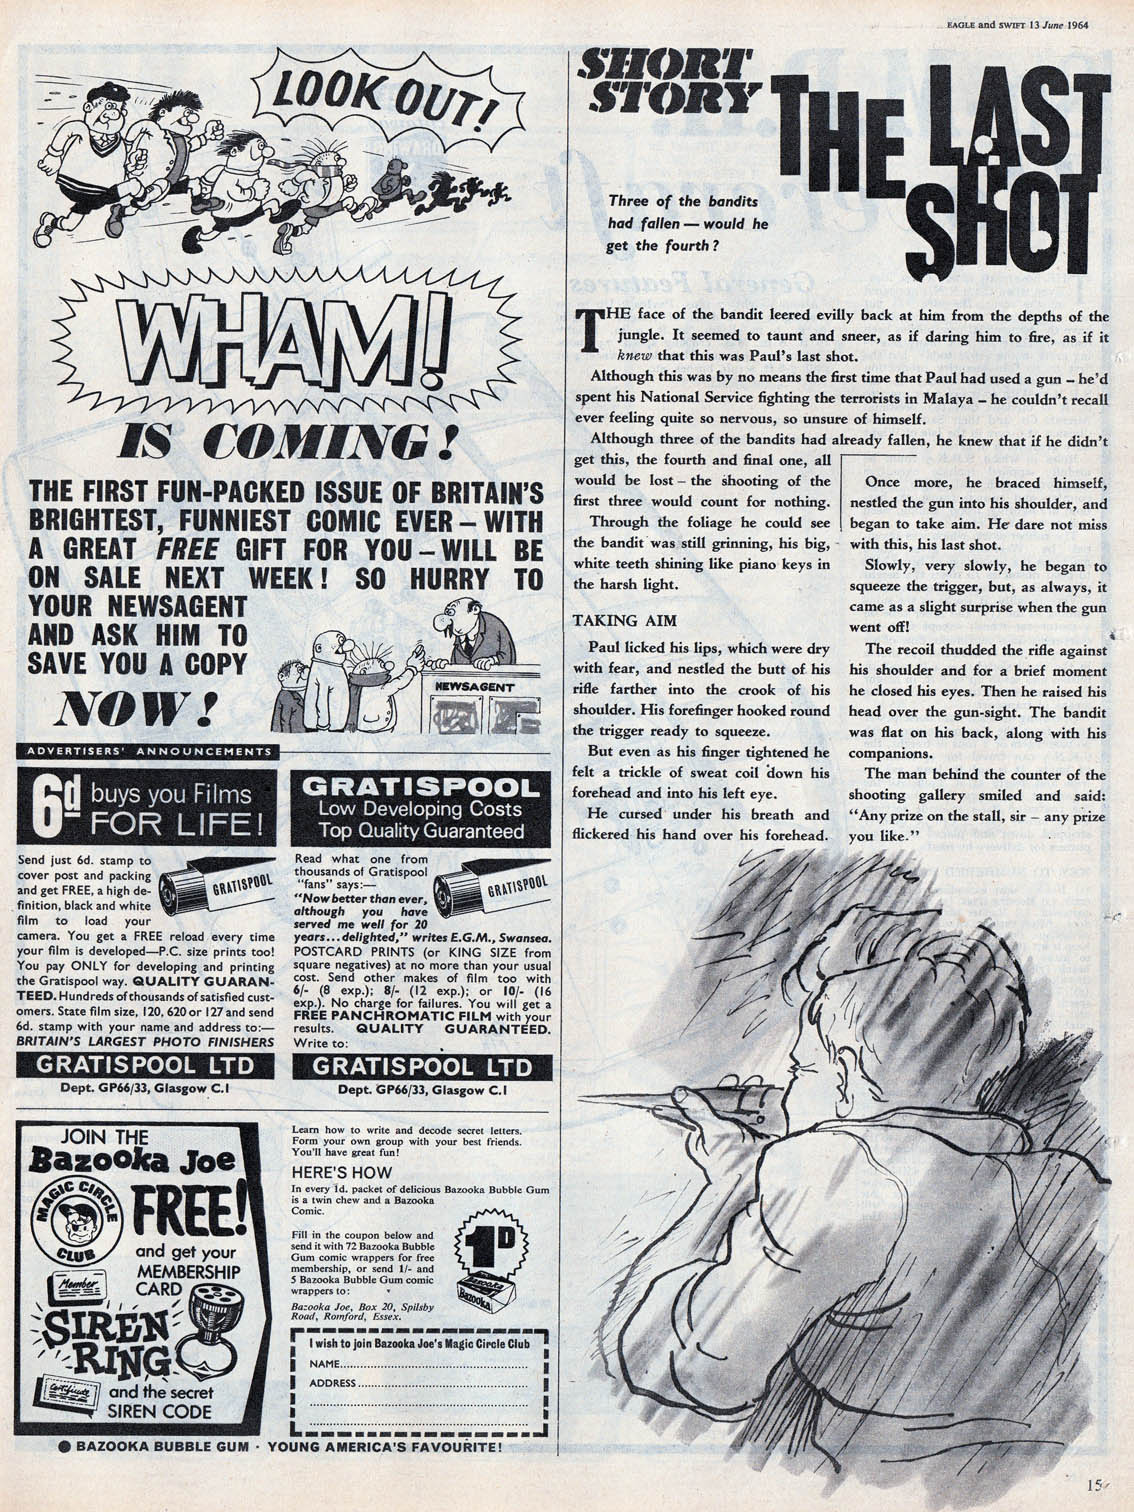 Blimey The Blog Of British Comics Look Out Wham Is Coming 1964